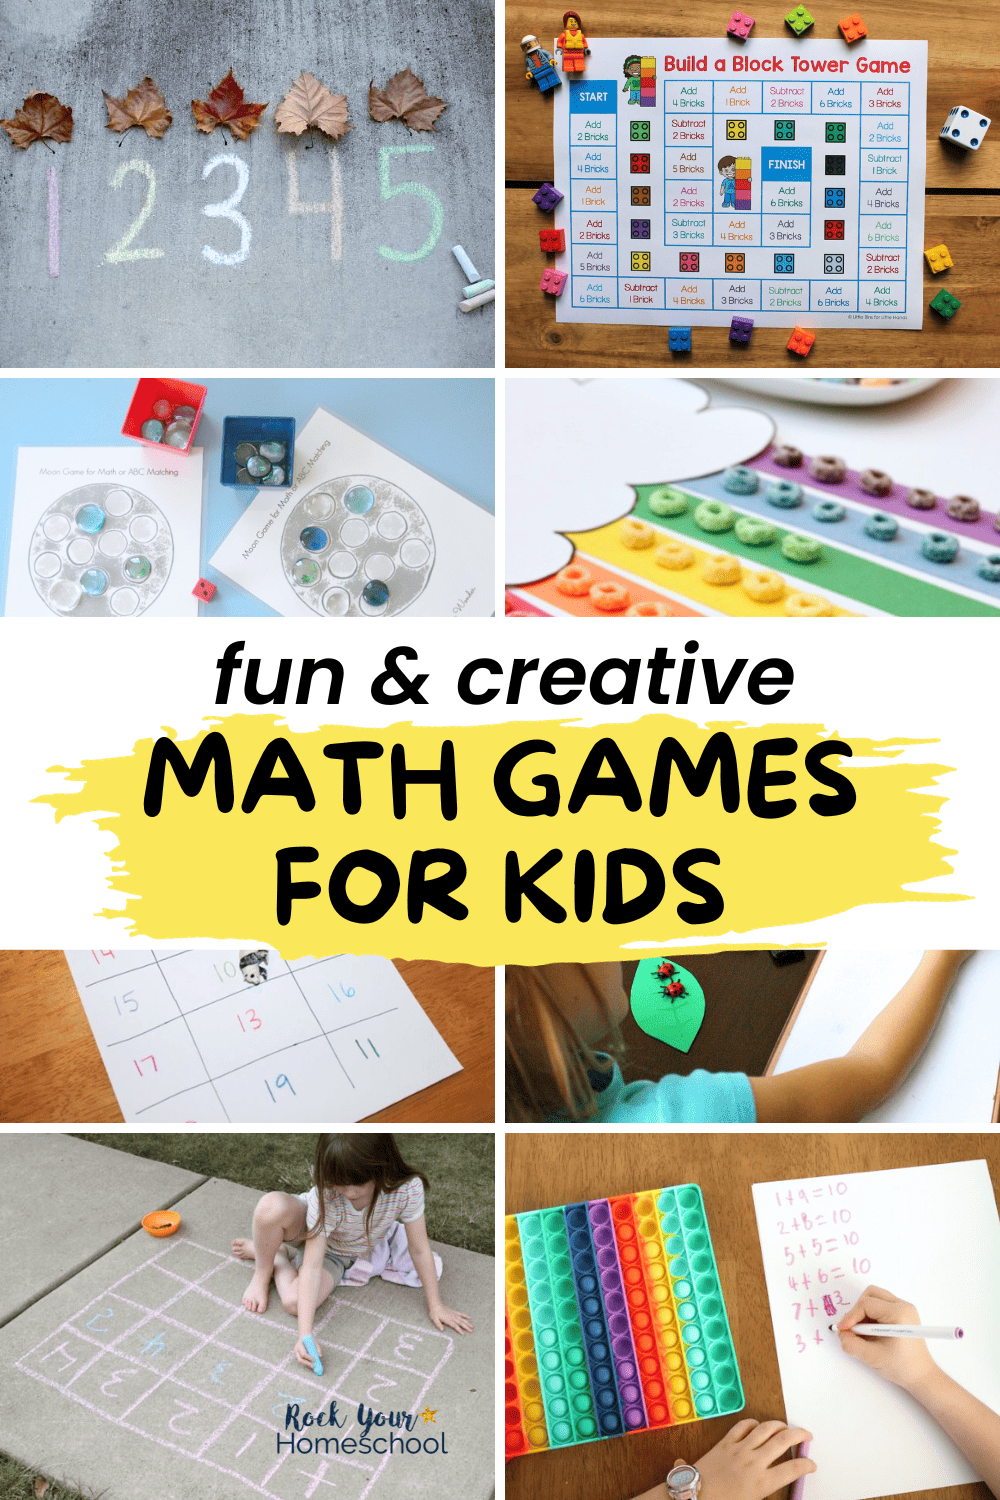 Math Games for Kids: 20+ Fun and Creative Activities to Try